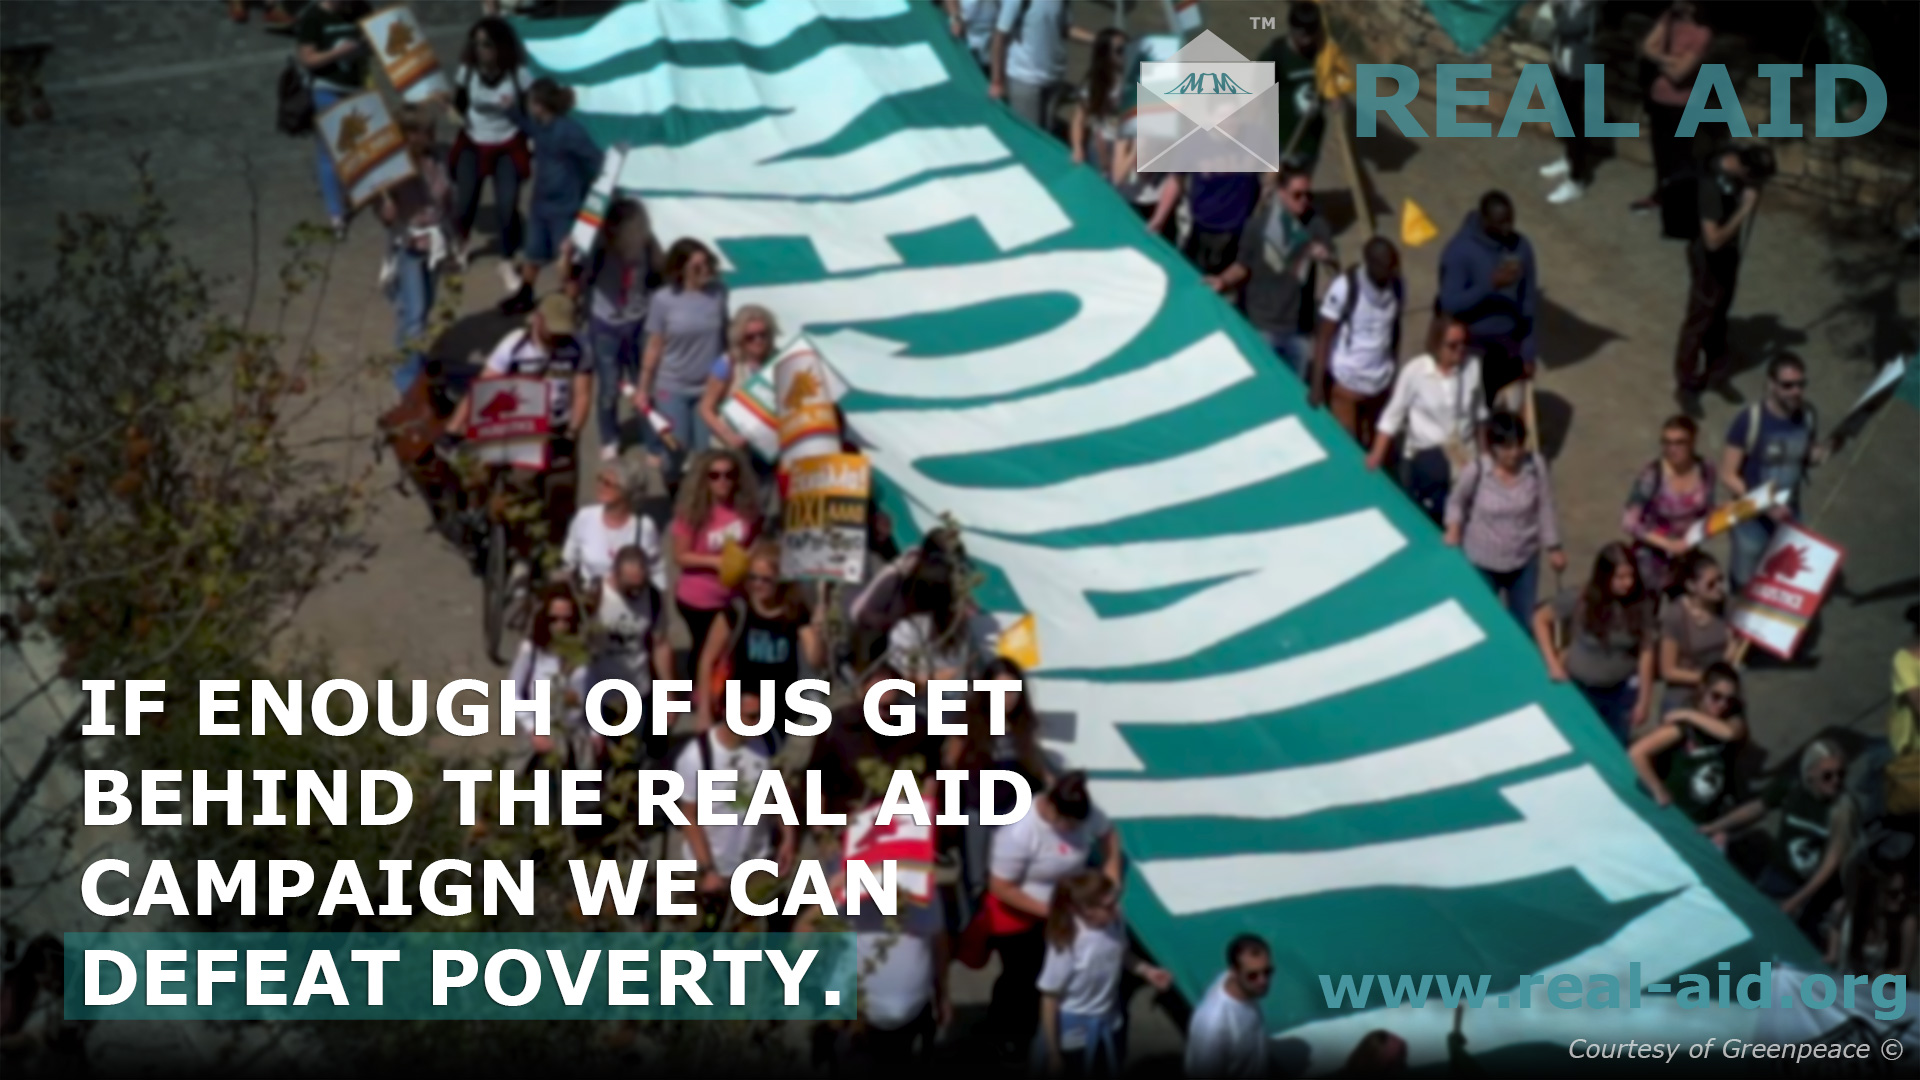 Real Aid poster, "if enough of us get behind the real aid campaign we cand efeat poverty" text, image of protestors with large banner reading inequality